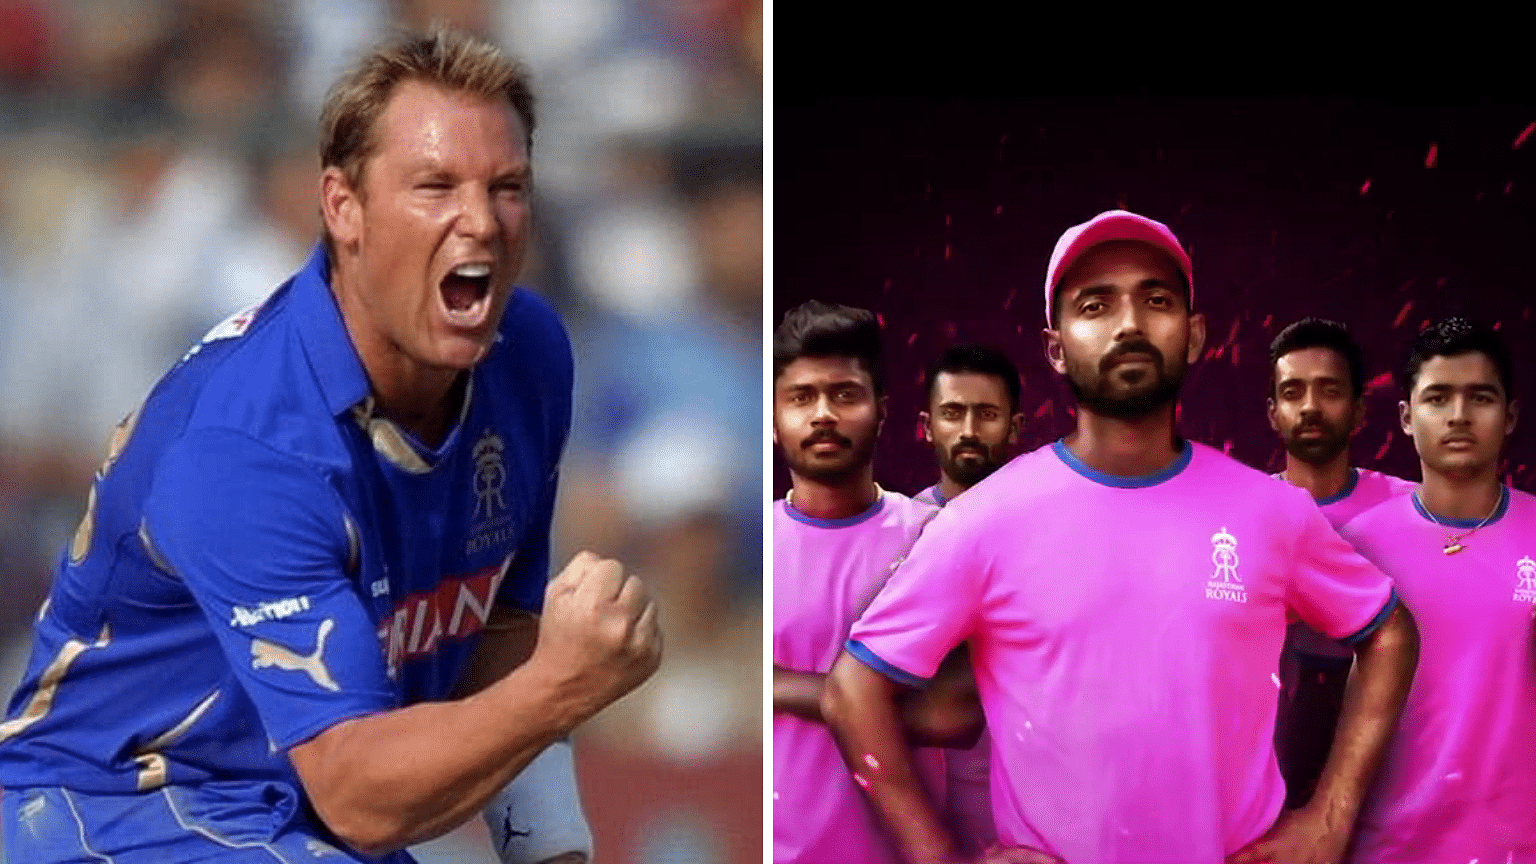 From left: Shane Warne and Rajasthan Royals in their new pink jersey.